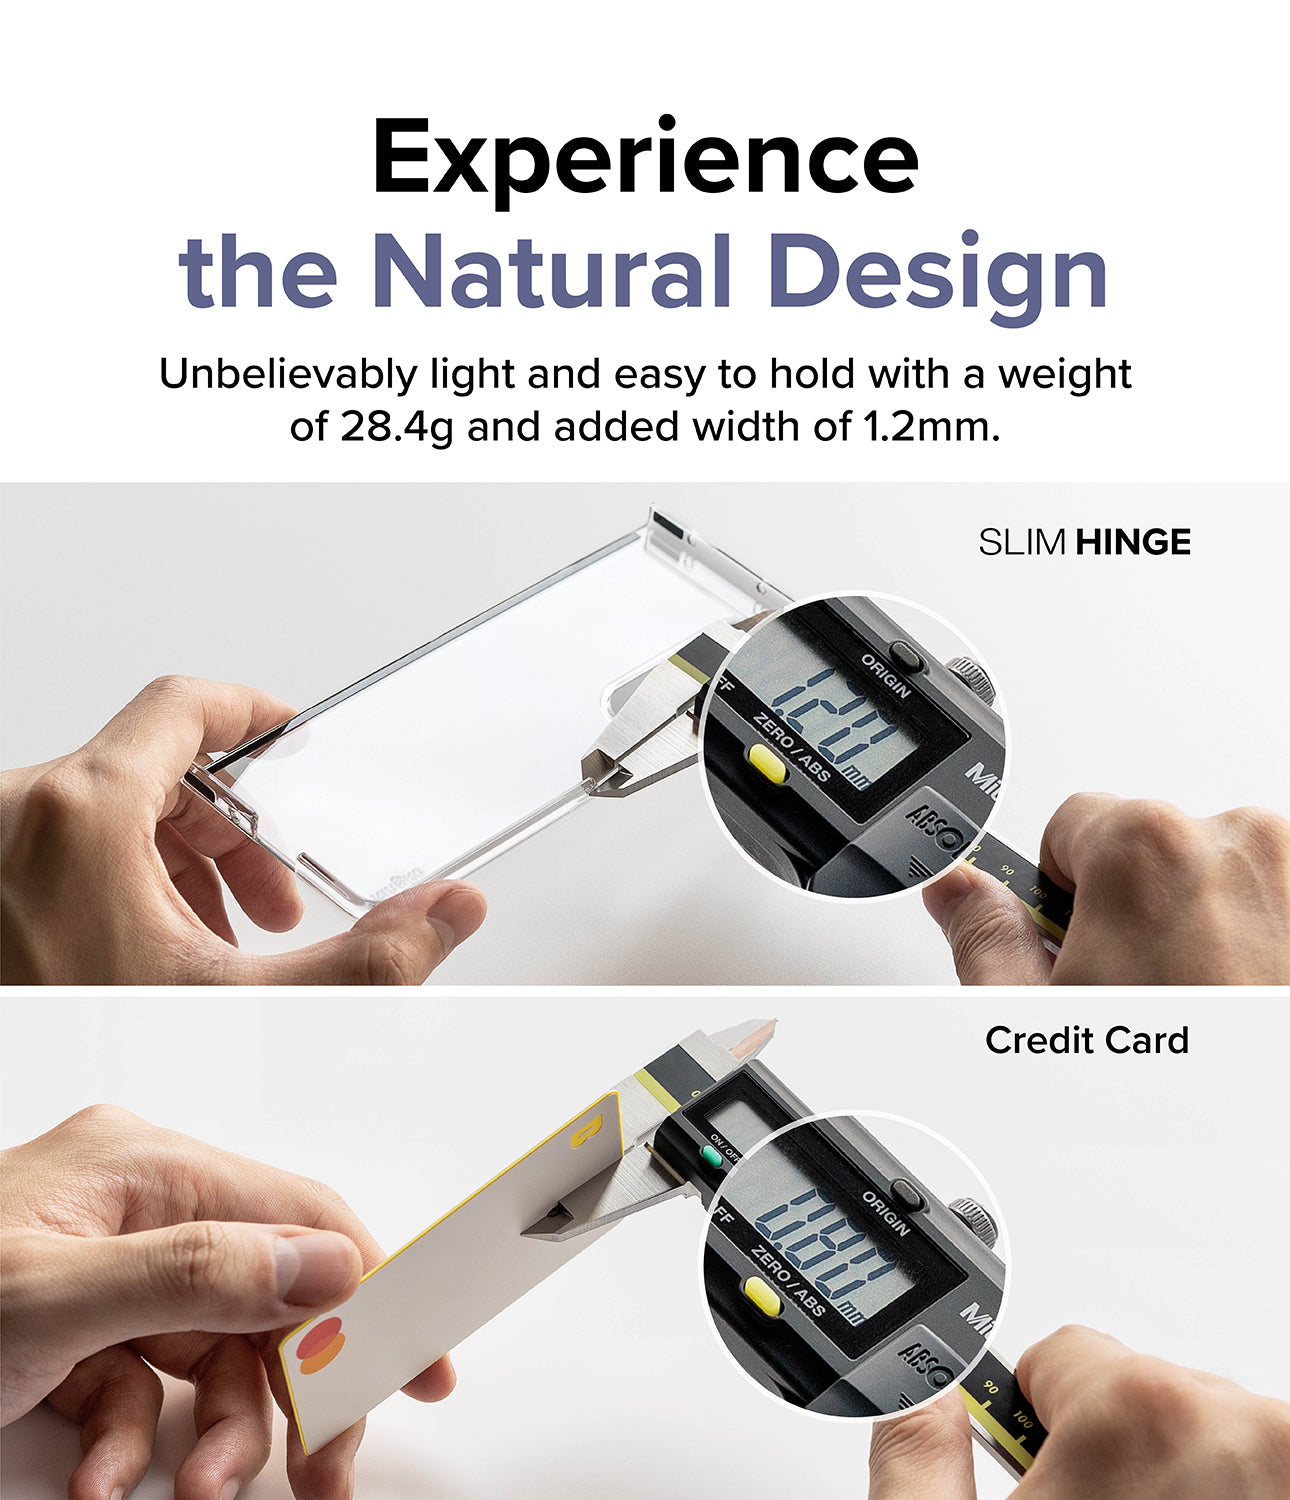 Galaxy Z Fold 5 Case | Slim Hinge - Experience the Natural Design. Unbelievably light an easy to hold with a weight of 28.4g and added width of 1.2mm